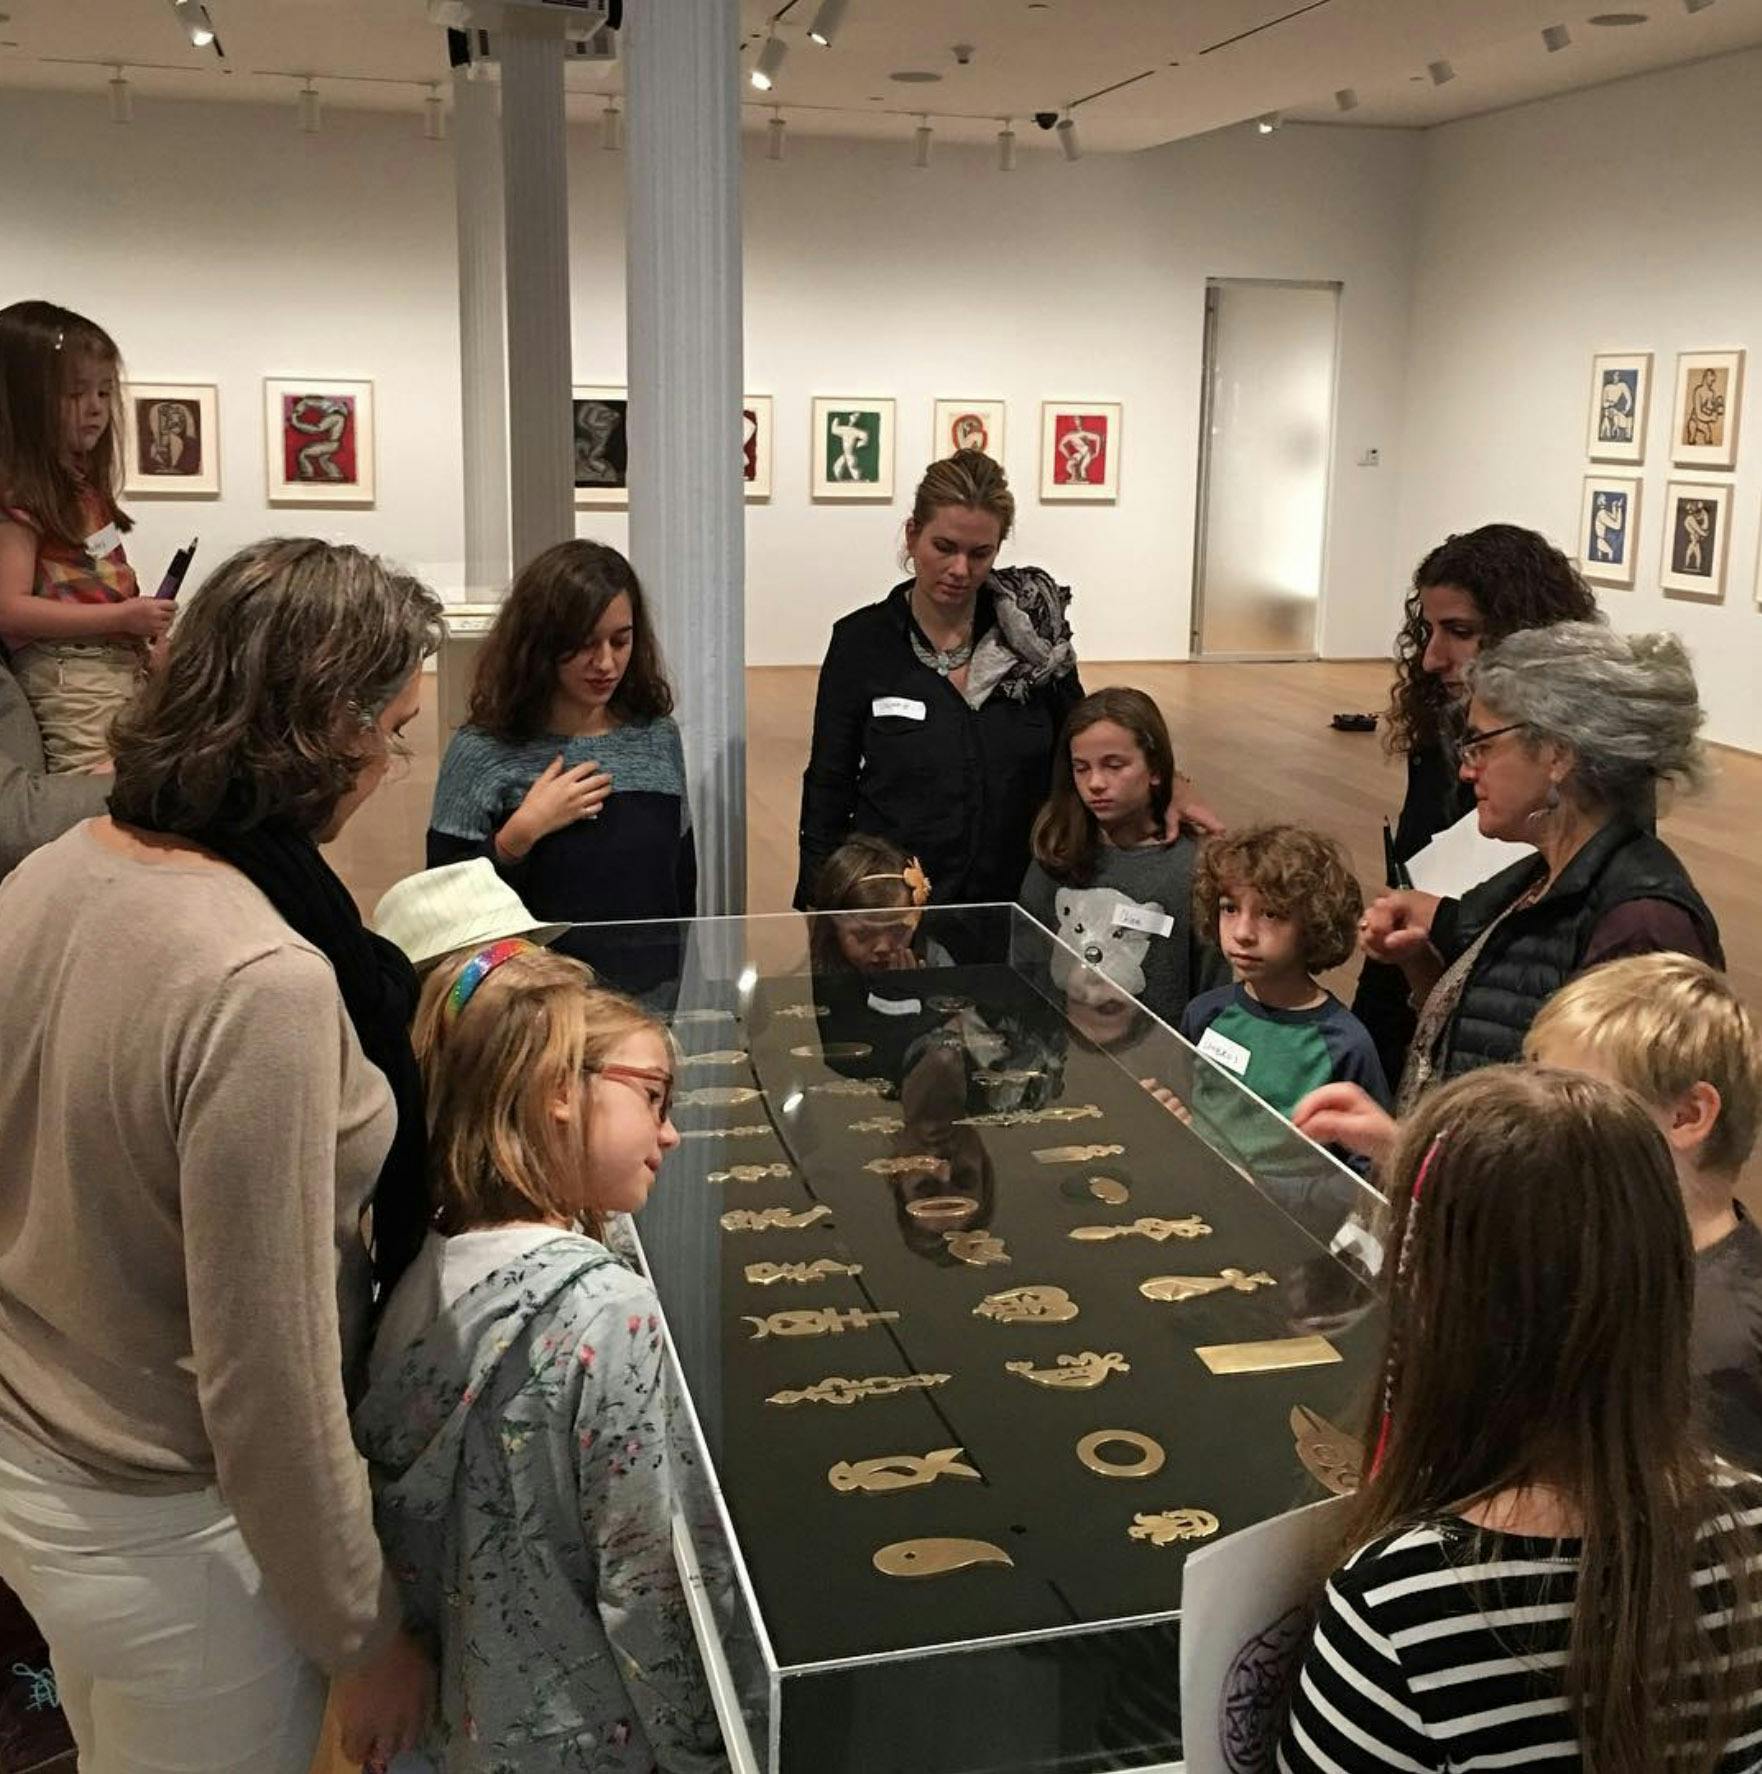 Students viewing the exhibition, Richard Pousette-Dart: 1930's, The Drawing Center, New York, NY, 2015. – The Richard Pousette-Dart Foundation